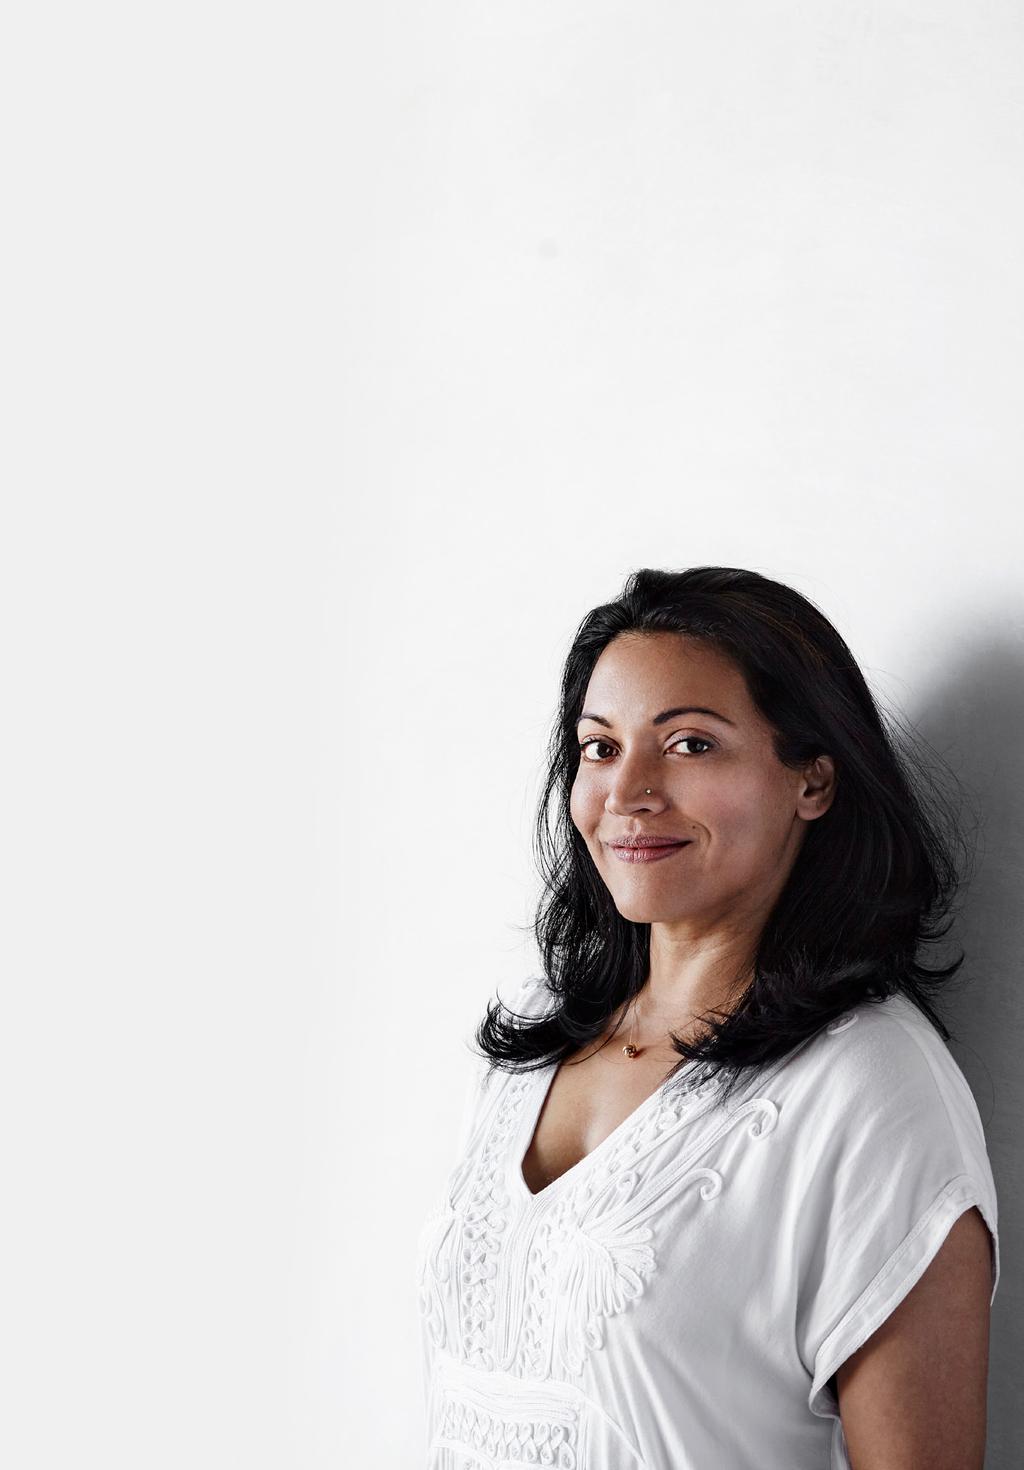 Aika was conceived in a spa in Melbourne, Australia, created by Eranthi Bonney, a mother of two who owned and operated two highend wellness spas.